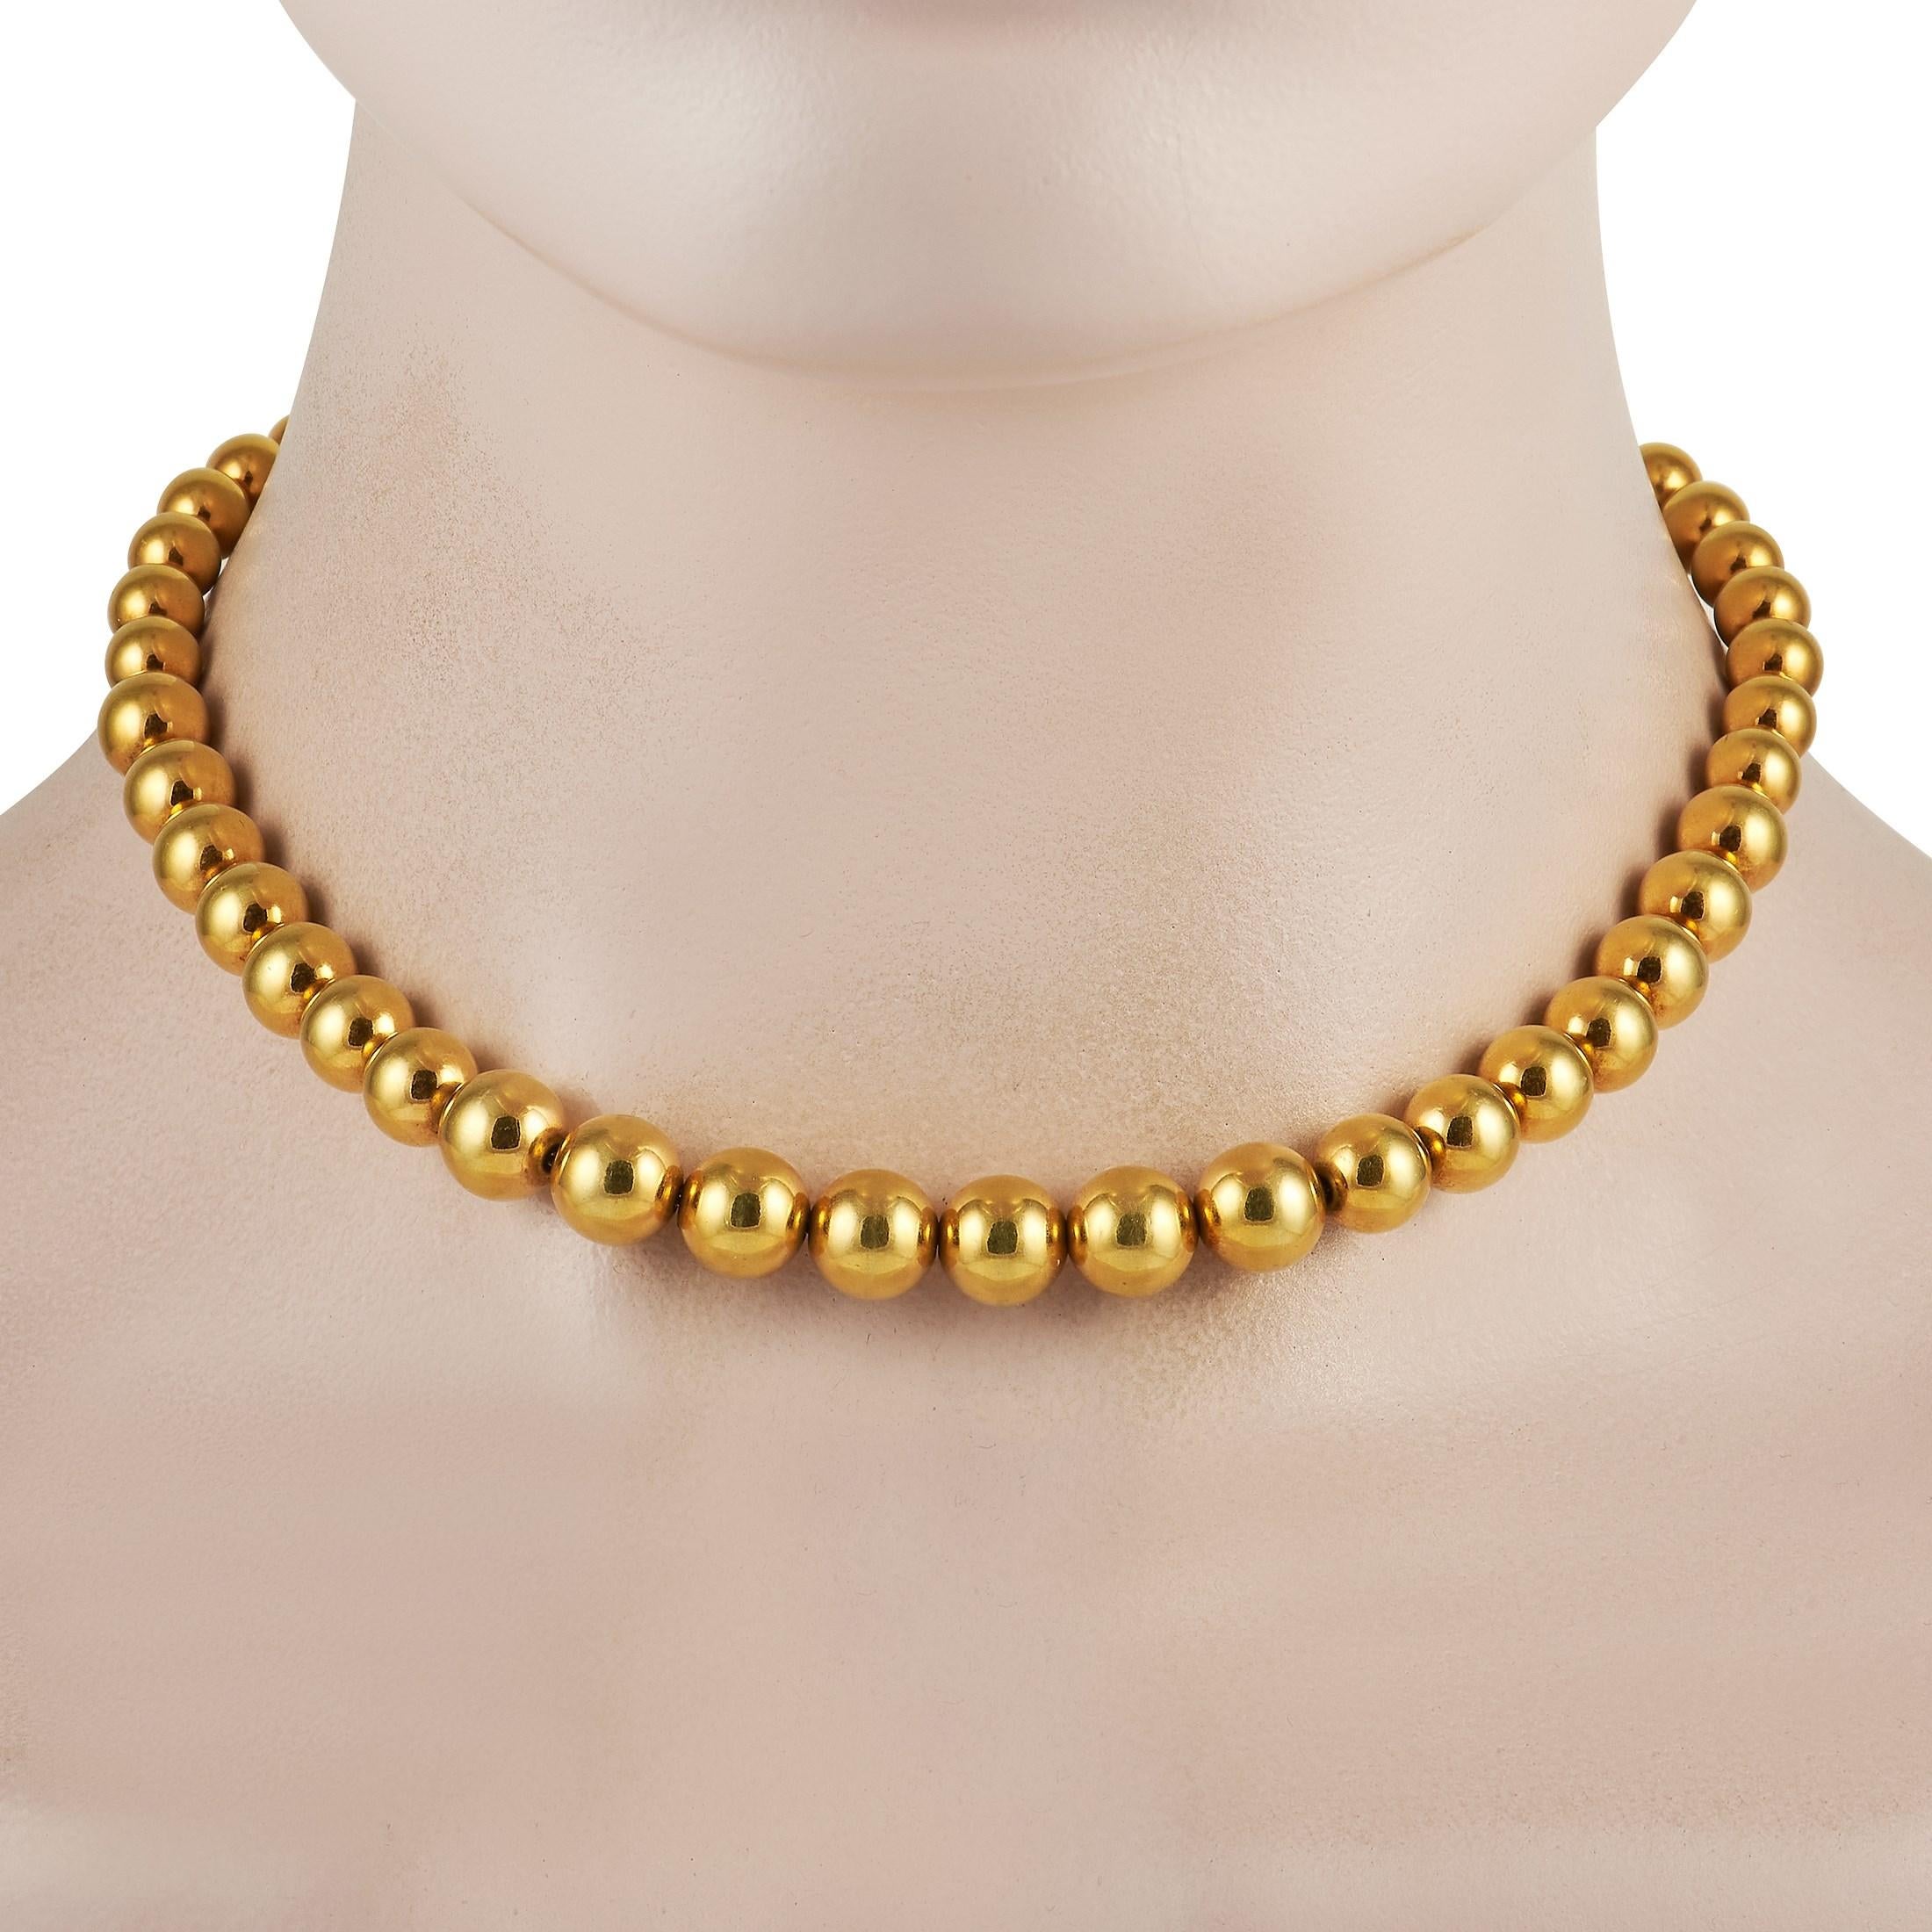 Glam up a pared-down outfit with the timeless elegance of this Tiffany & Co. Gold Bead Necklace. This accessory comes designed as a single strand of round golden beads. The simple yet stand-out style can instantly change the look of any outfit. Make